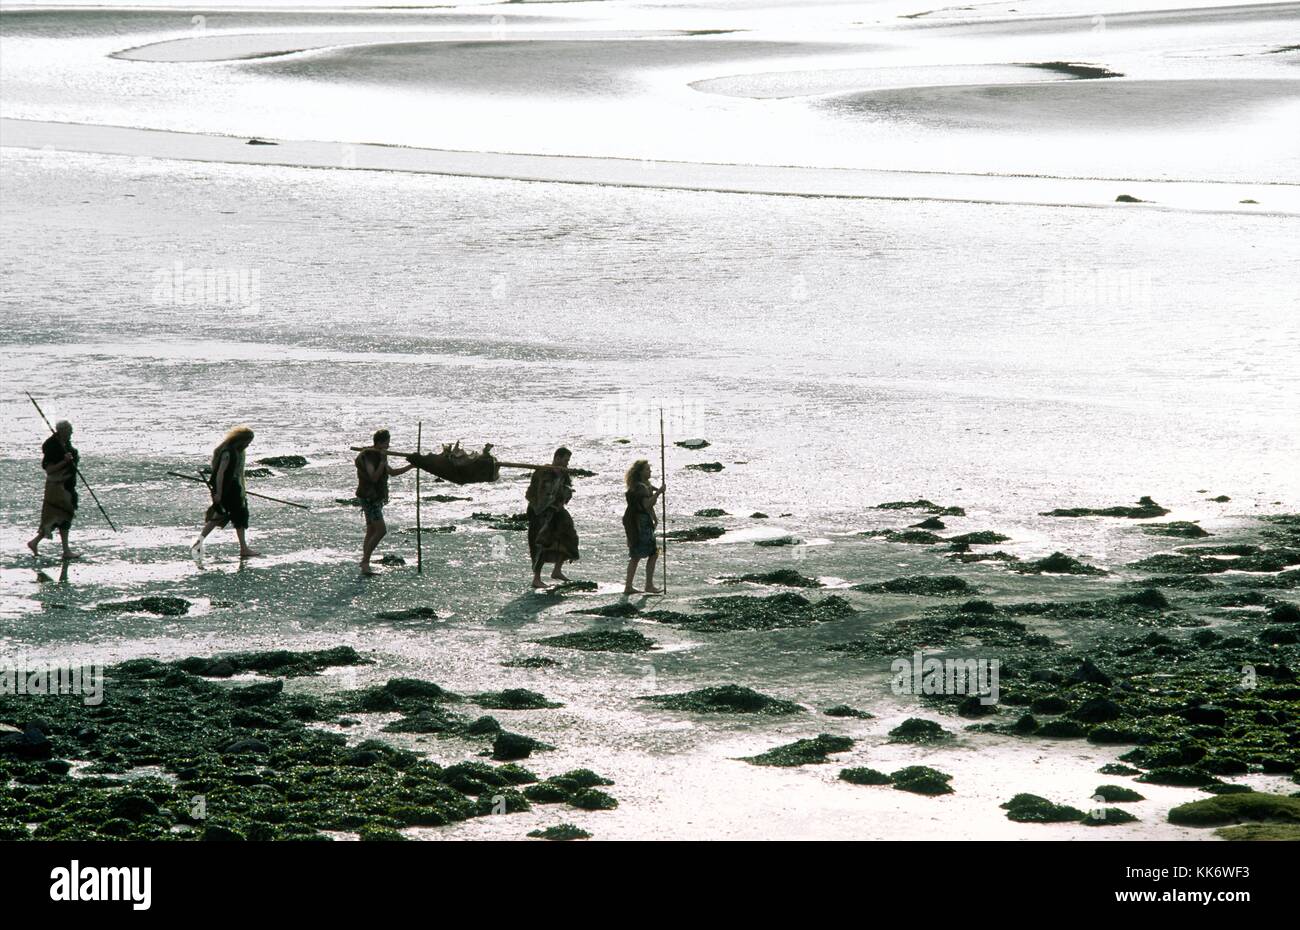 Neolithic Mesolithic prehistoric caveman cavemen cave man hunter gatherer walking on mud flat tidal estuary carrying deer food carcass and spears Stock Photo